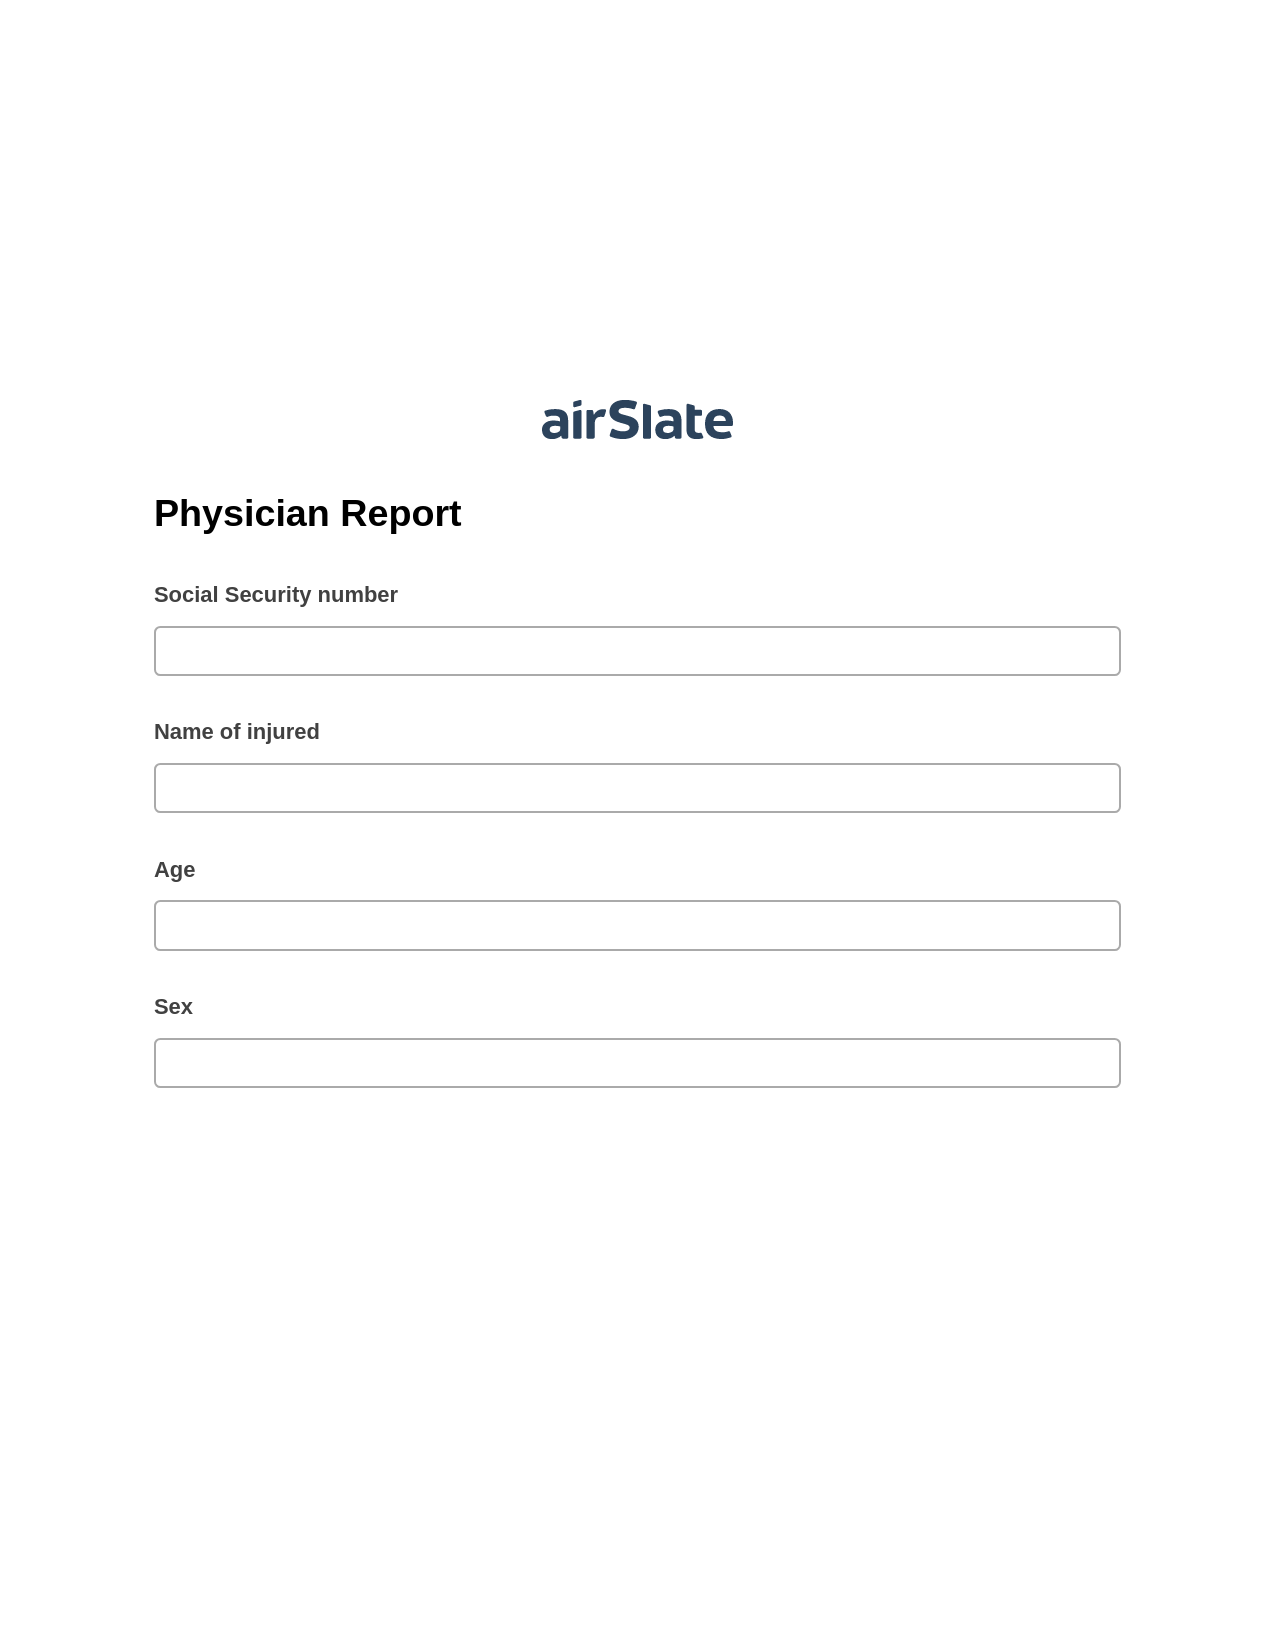 Physician Report Pre-fill from Excel Spreadsheet Bot, Email Notification Bot, Archive to Dropbox Bot